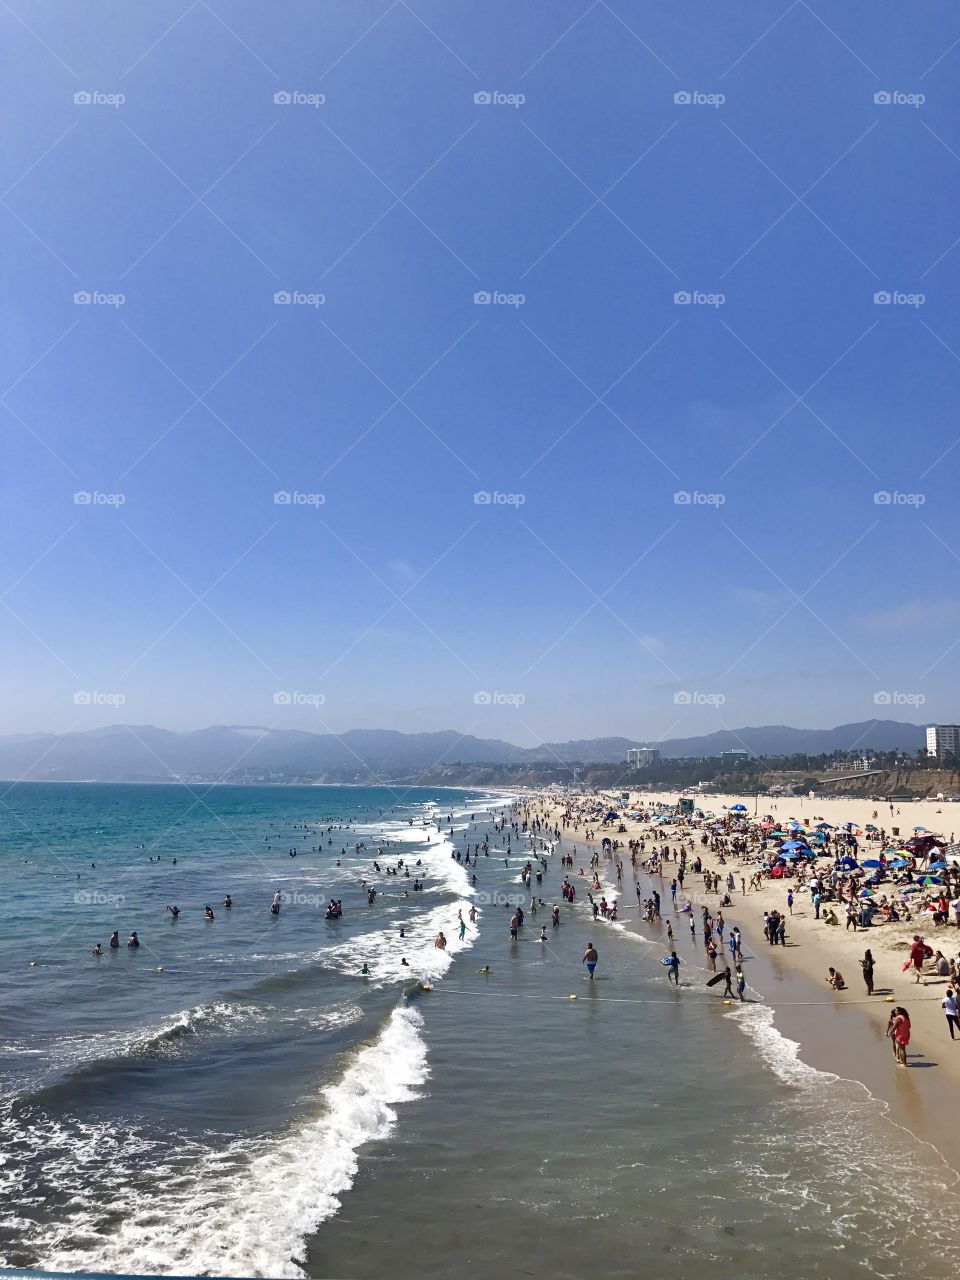 Crowded Downtown Santa Monica beach at midday. 